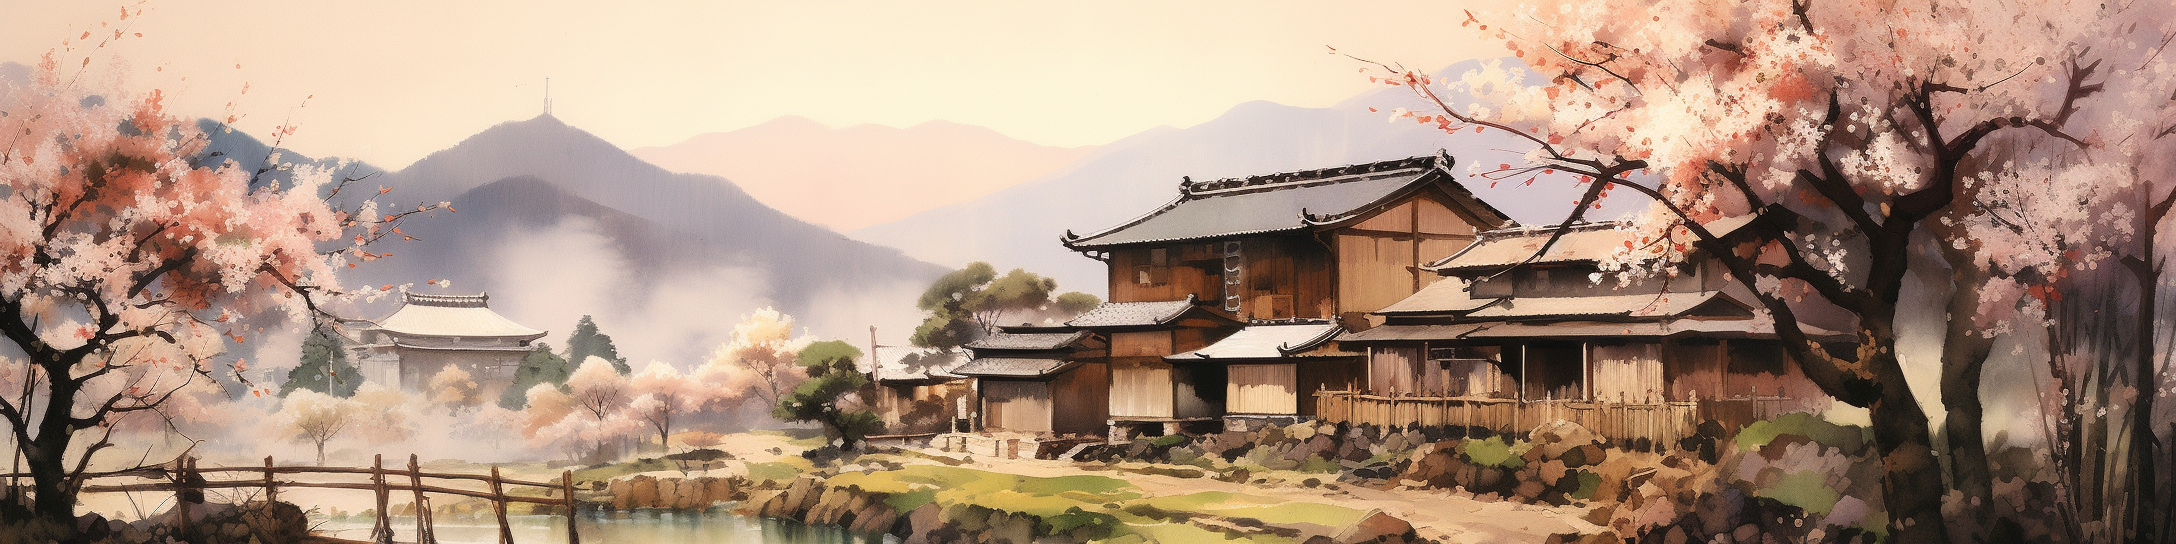 realistic watercolor Gansai of japan's countryside, rolling hills, cherry blossoms